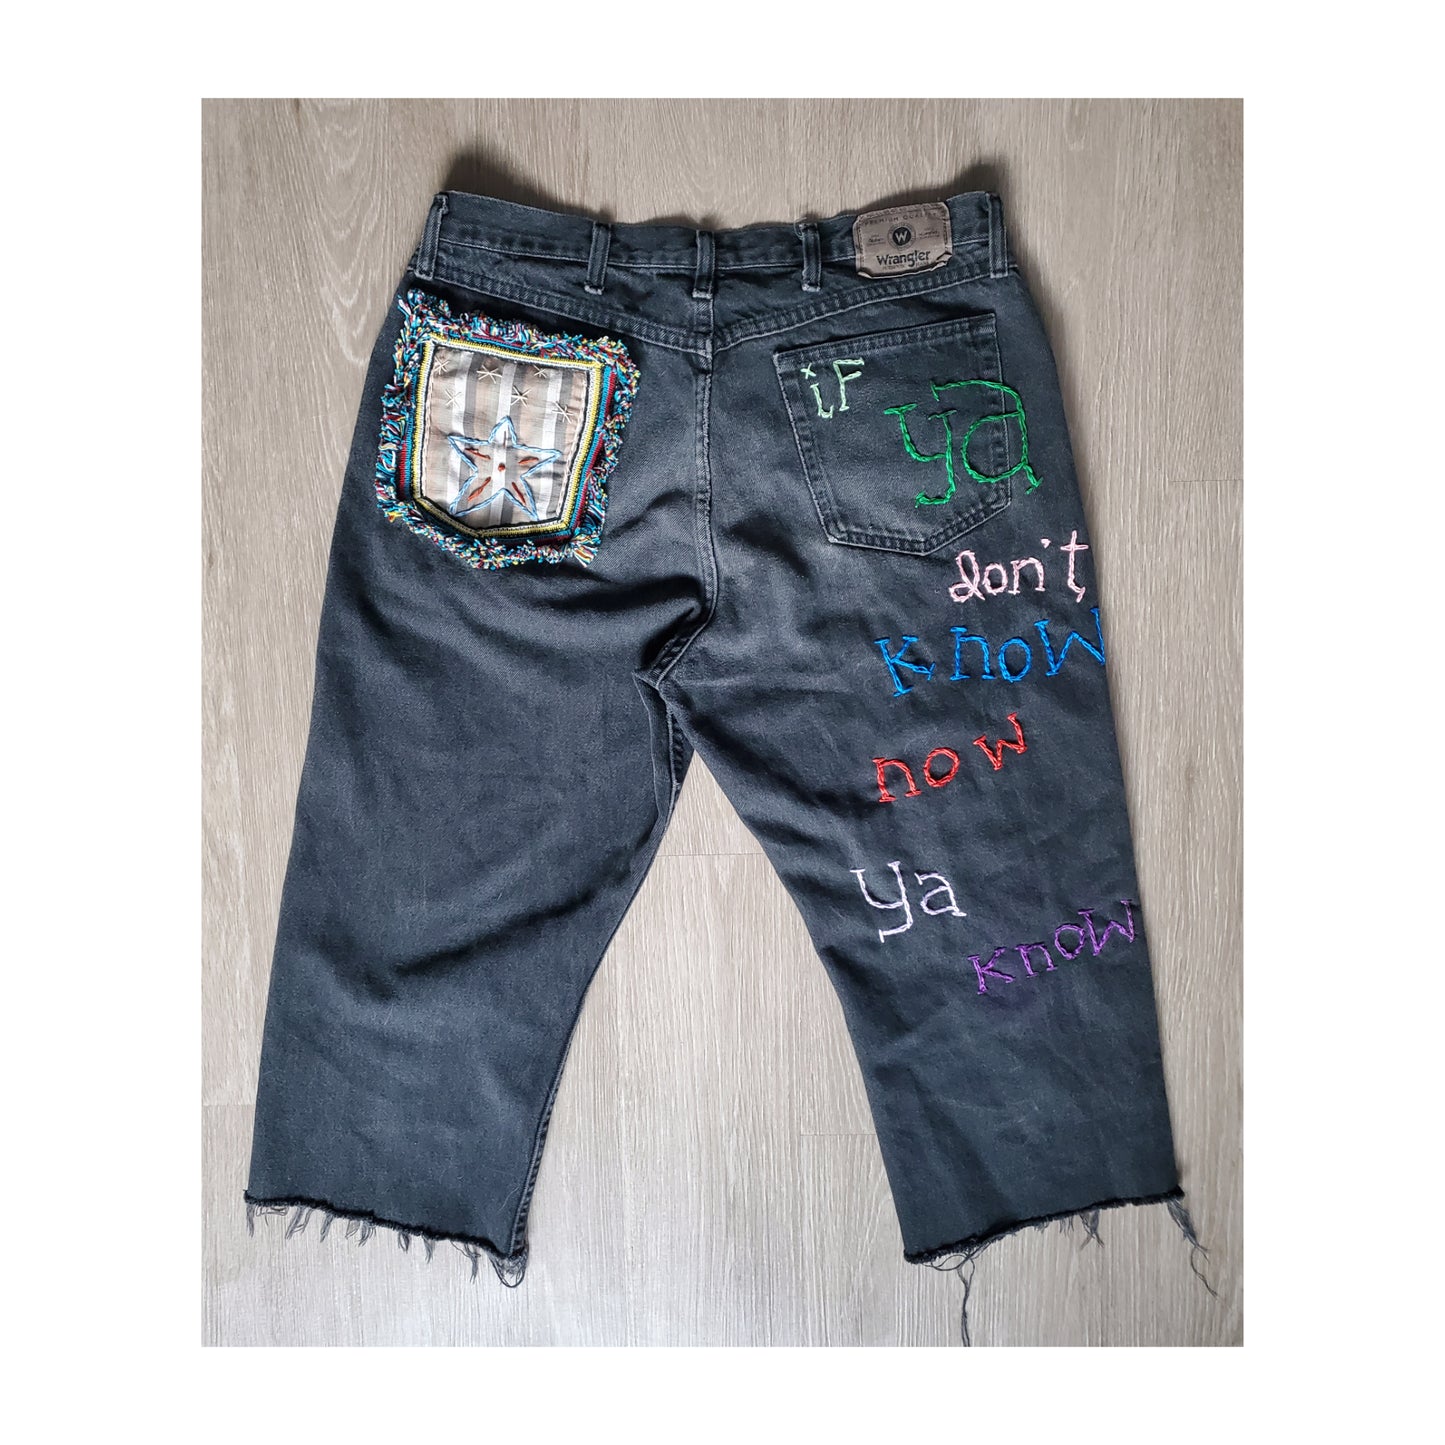 Hand Embroidered Artwear Jeans by Becky Bacsik